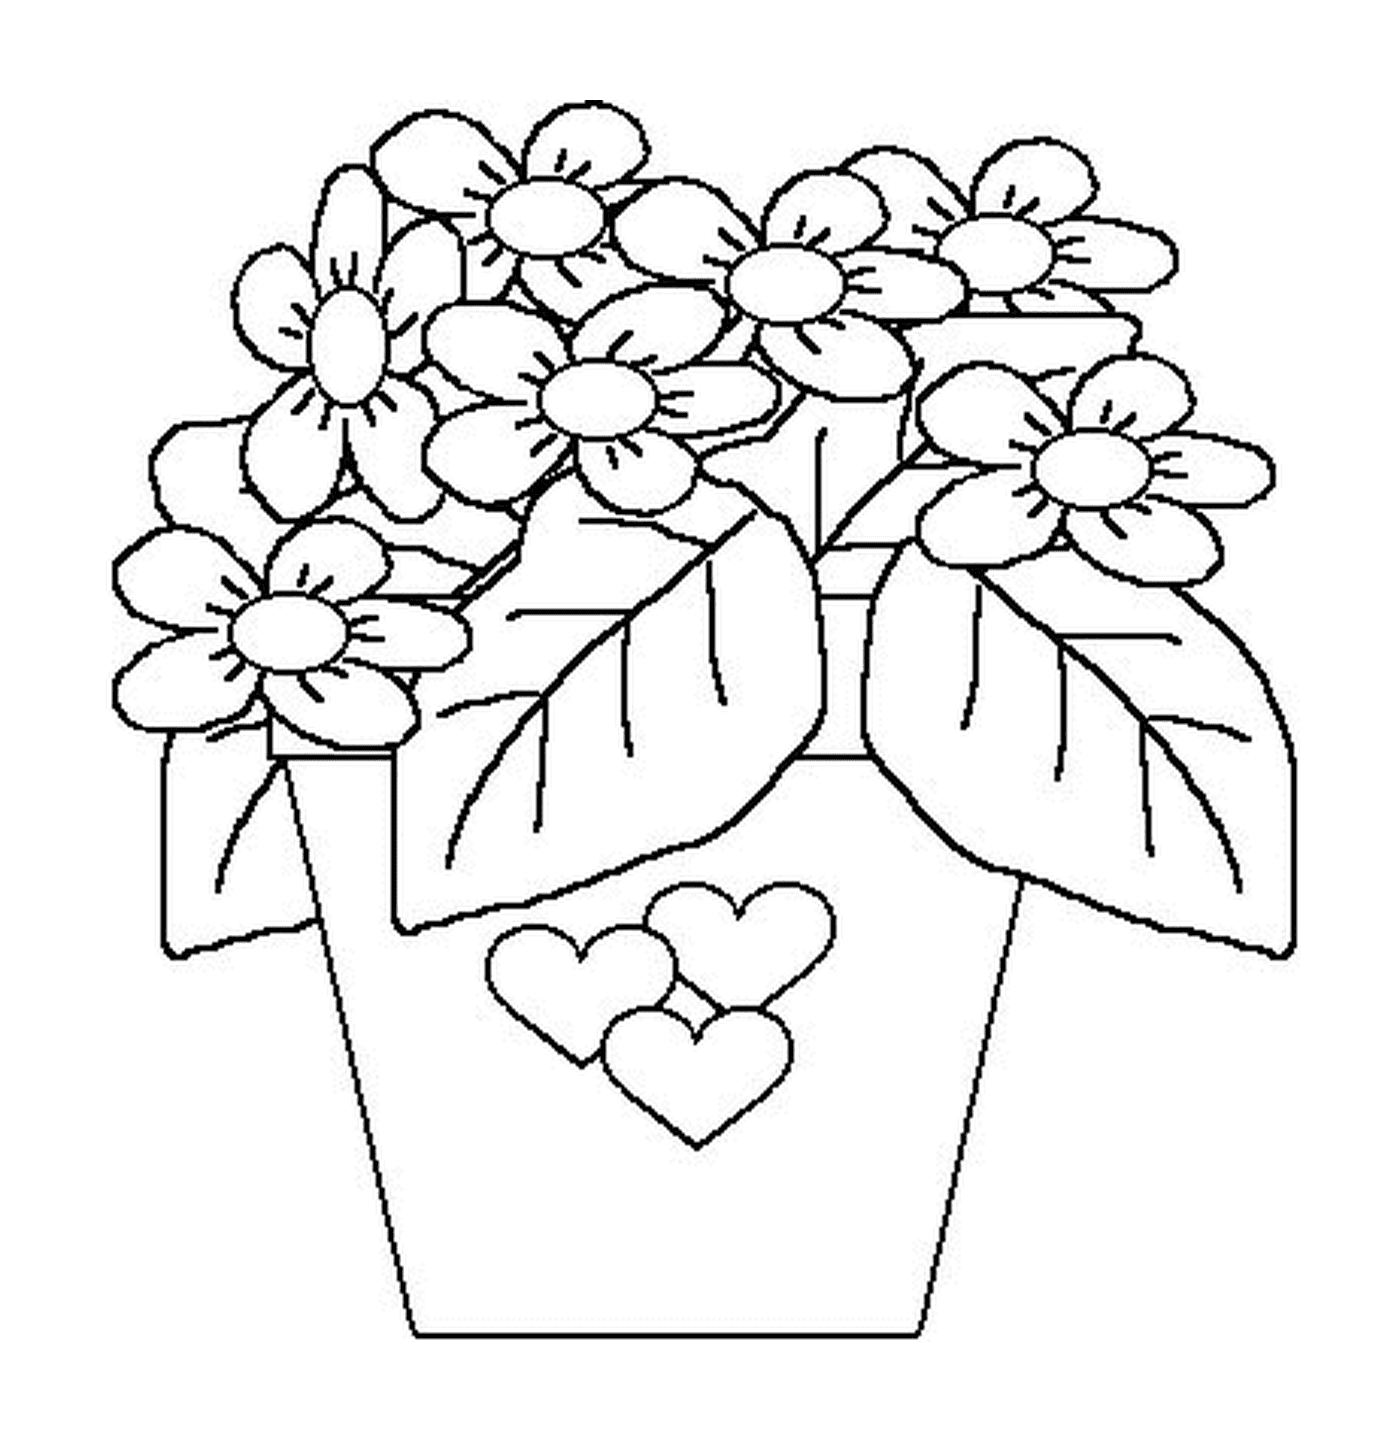  Pot of flowers and hearts 